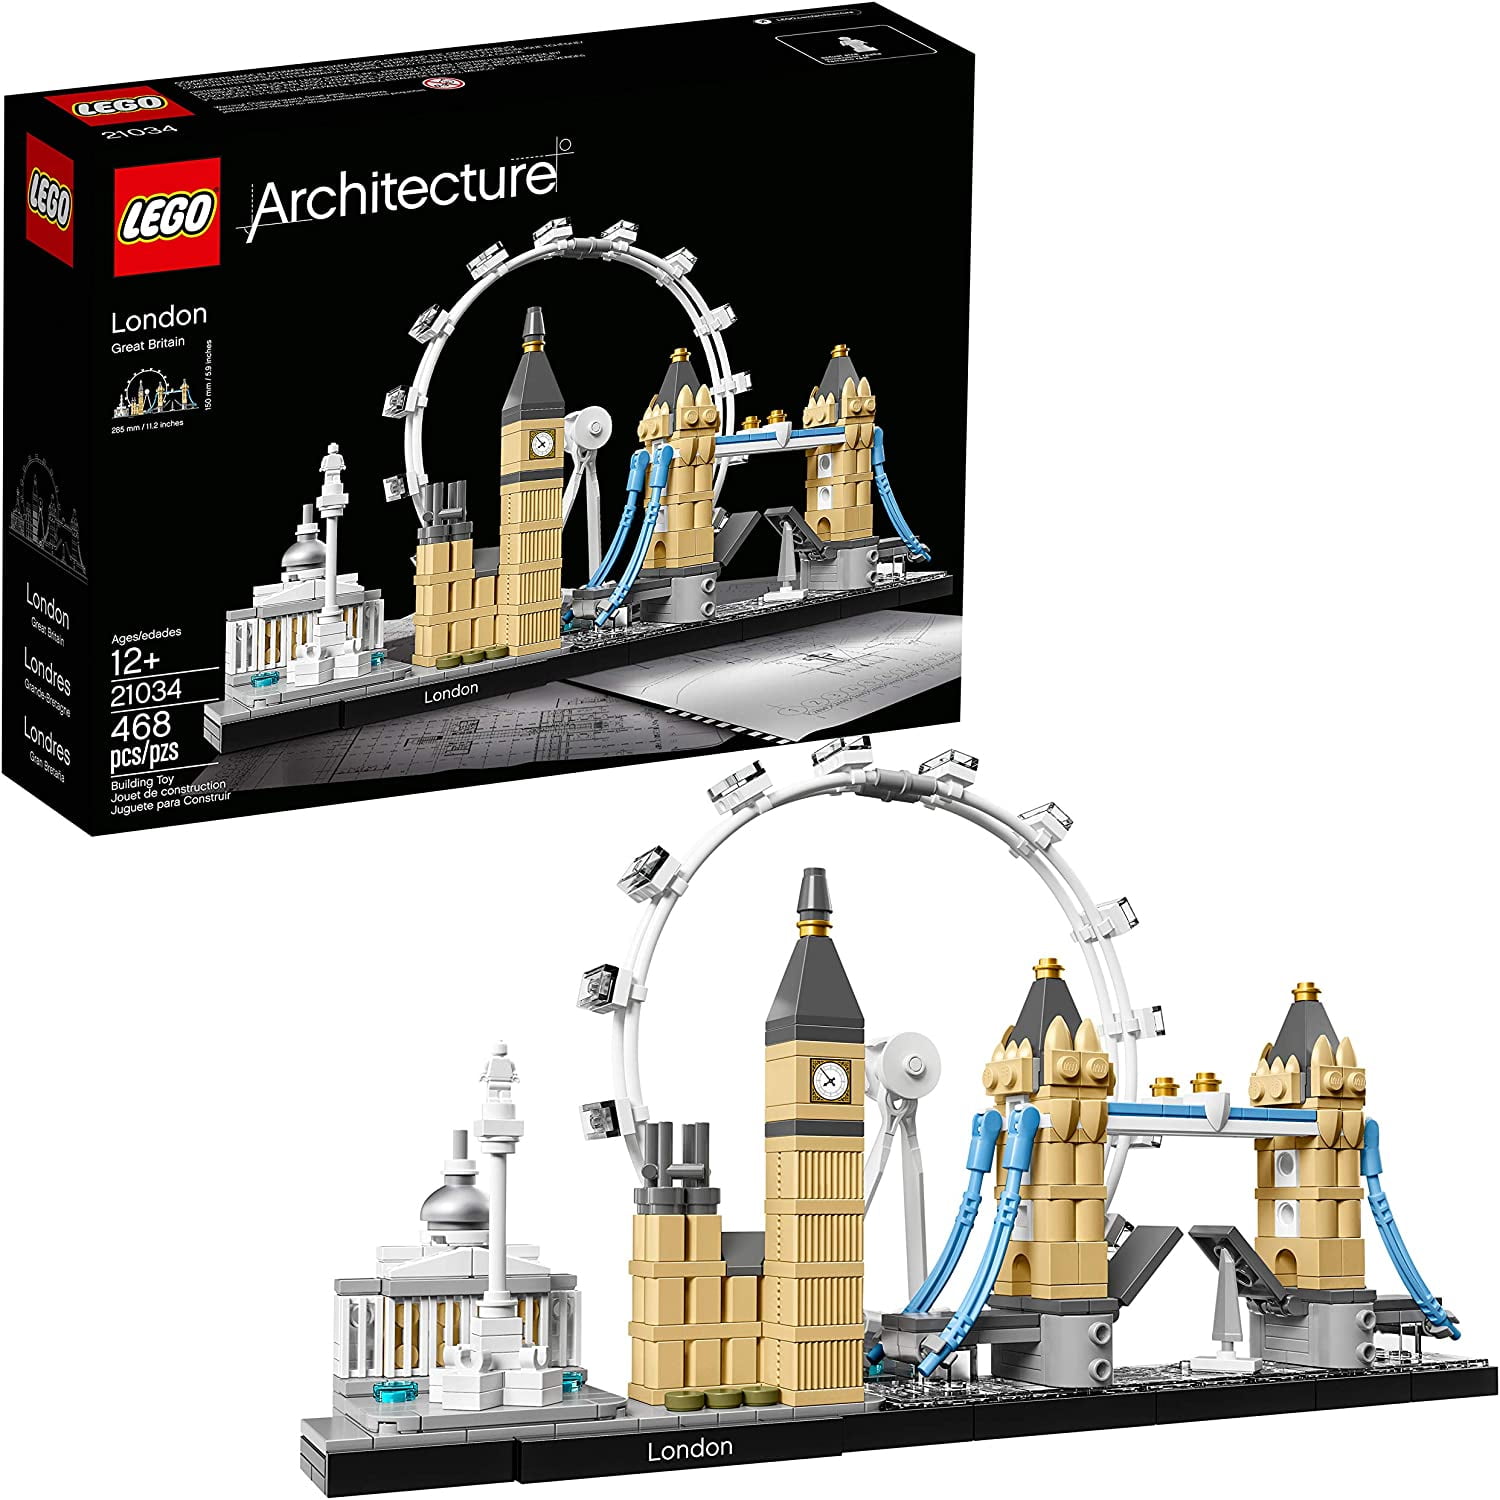 LEGO Architecture London Skyline Collection 21034 Building Set Model Kit and Gift for Kids and Adults